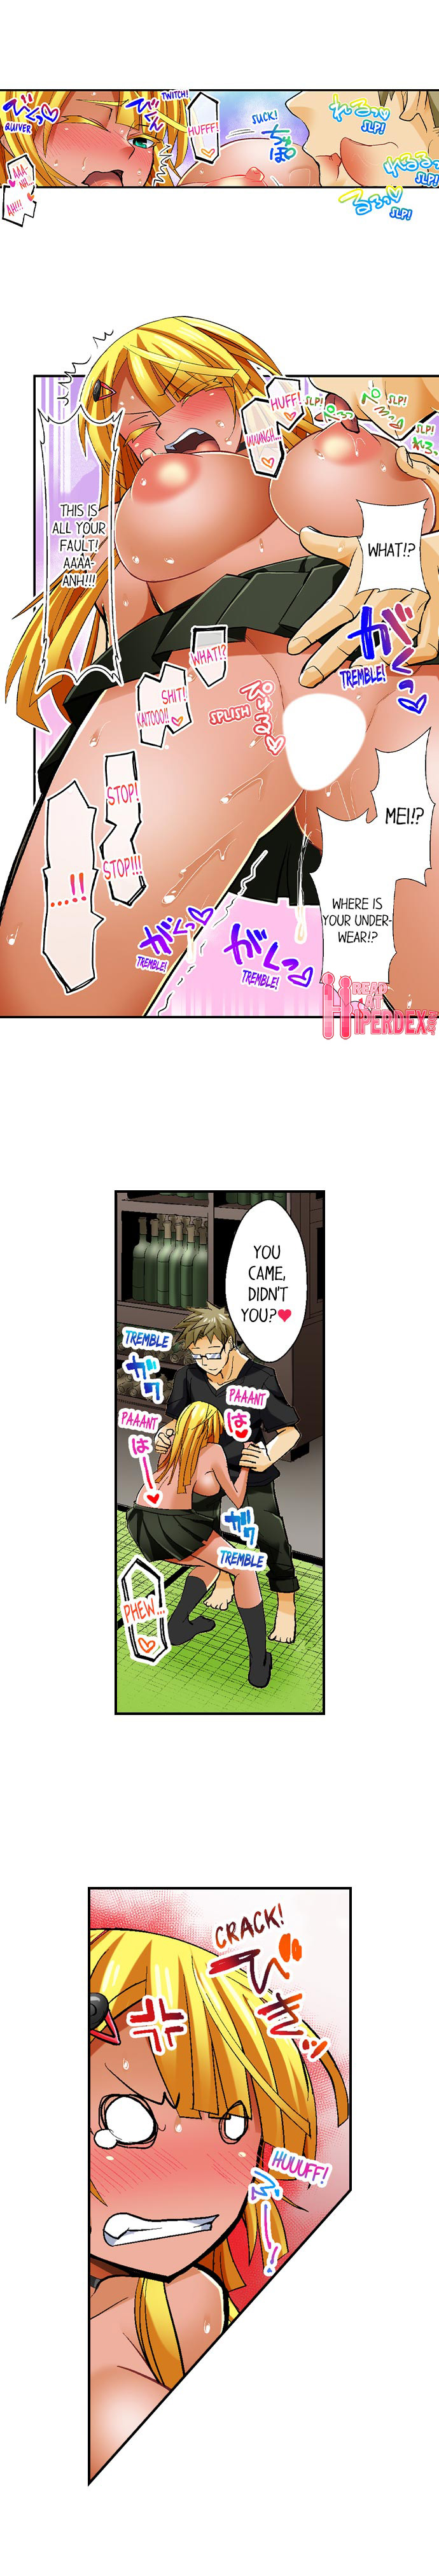 Sex With a Tanned Girl in a Bathhouse - Chapter 8 Page 5